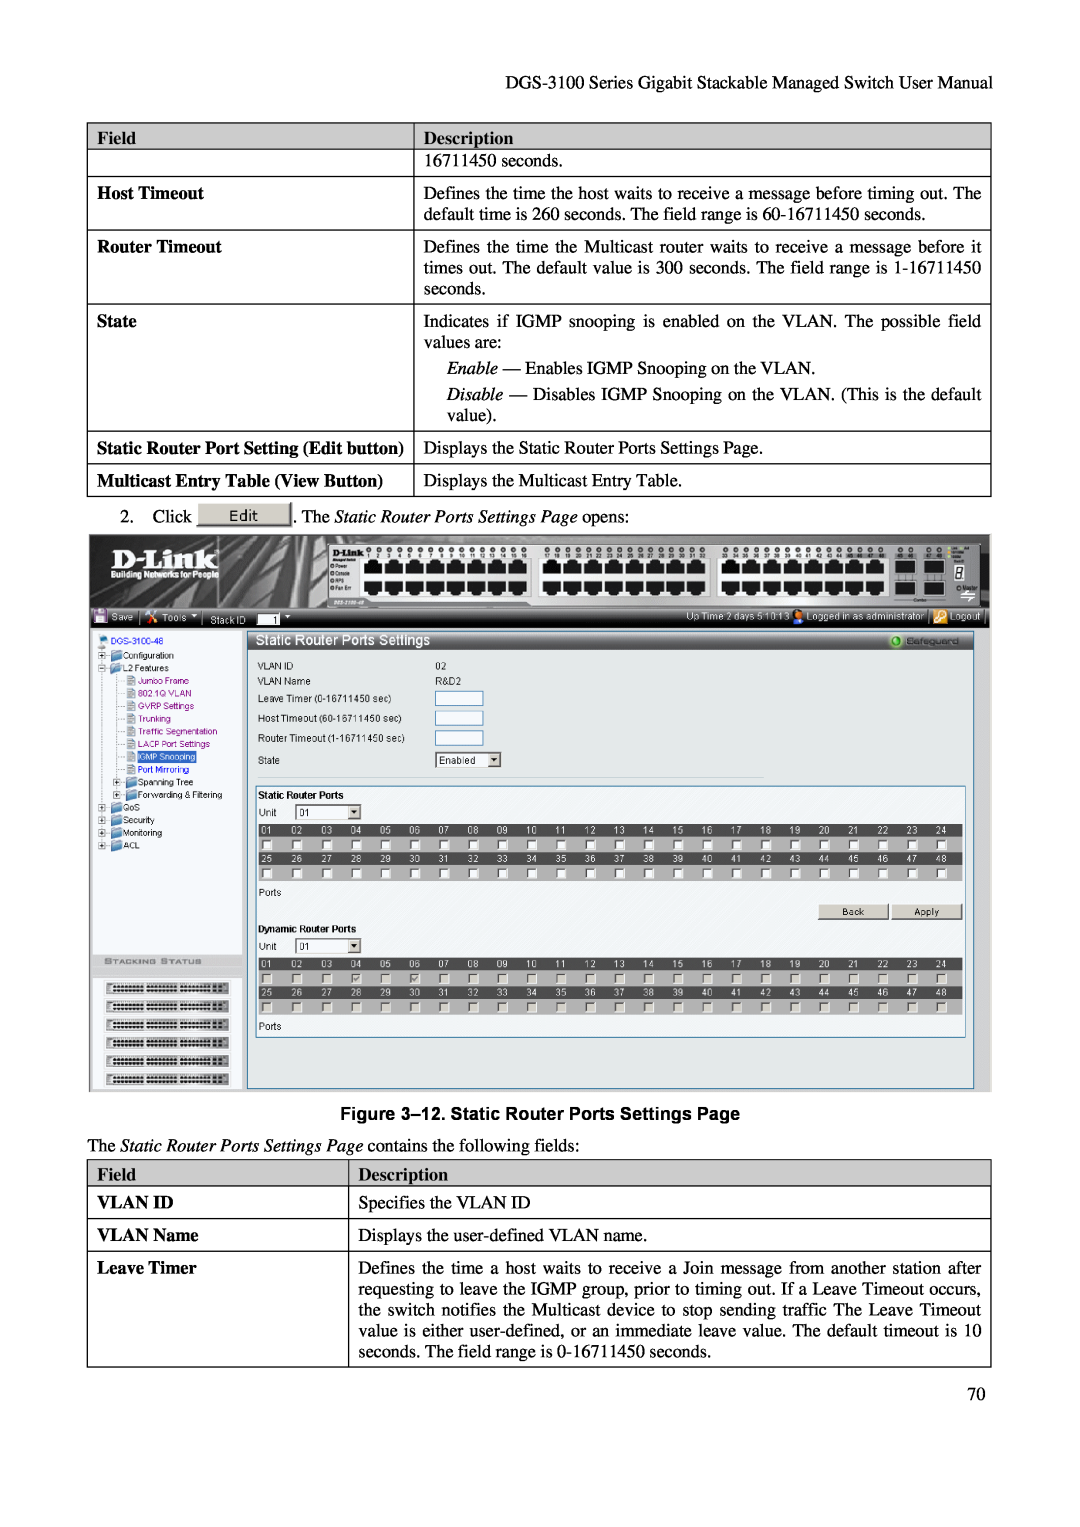 D-Link DGS-3100 Field, Description, Host Timeout, Router Timeout, State, Static Router Port Setting Edit button, Vlan Id 